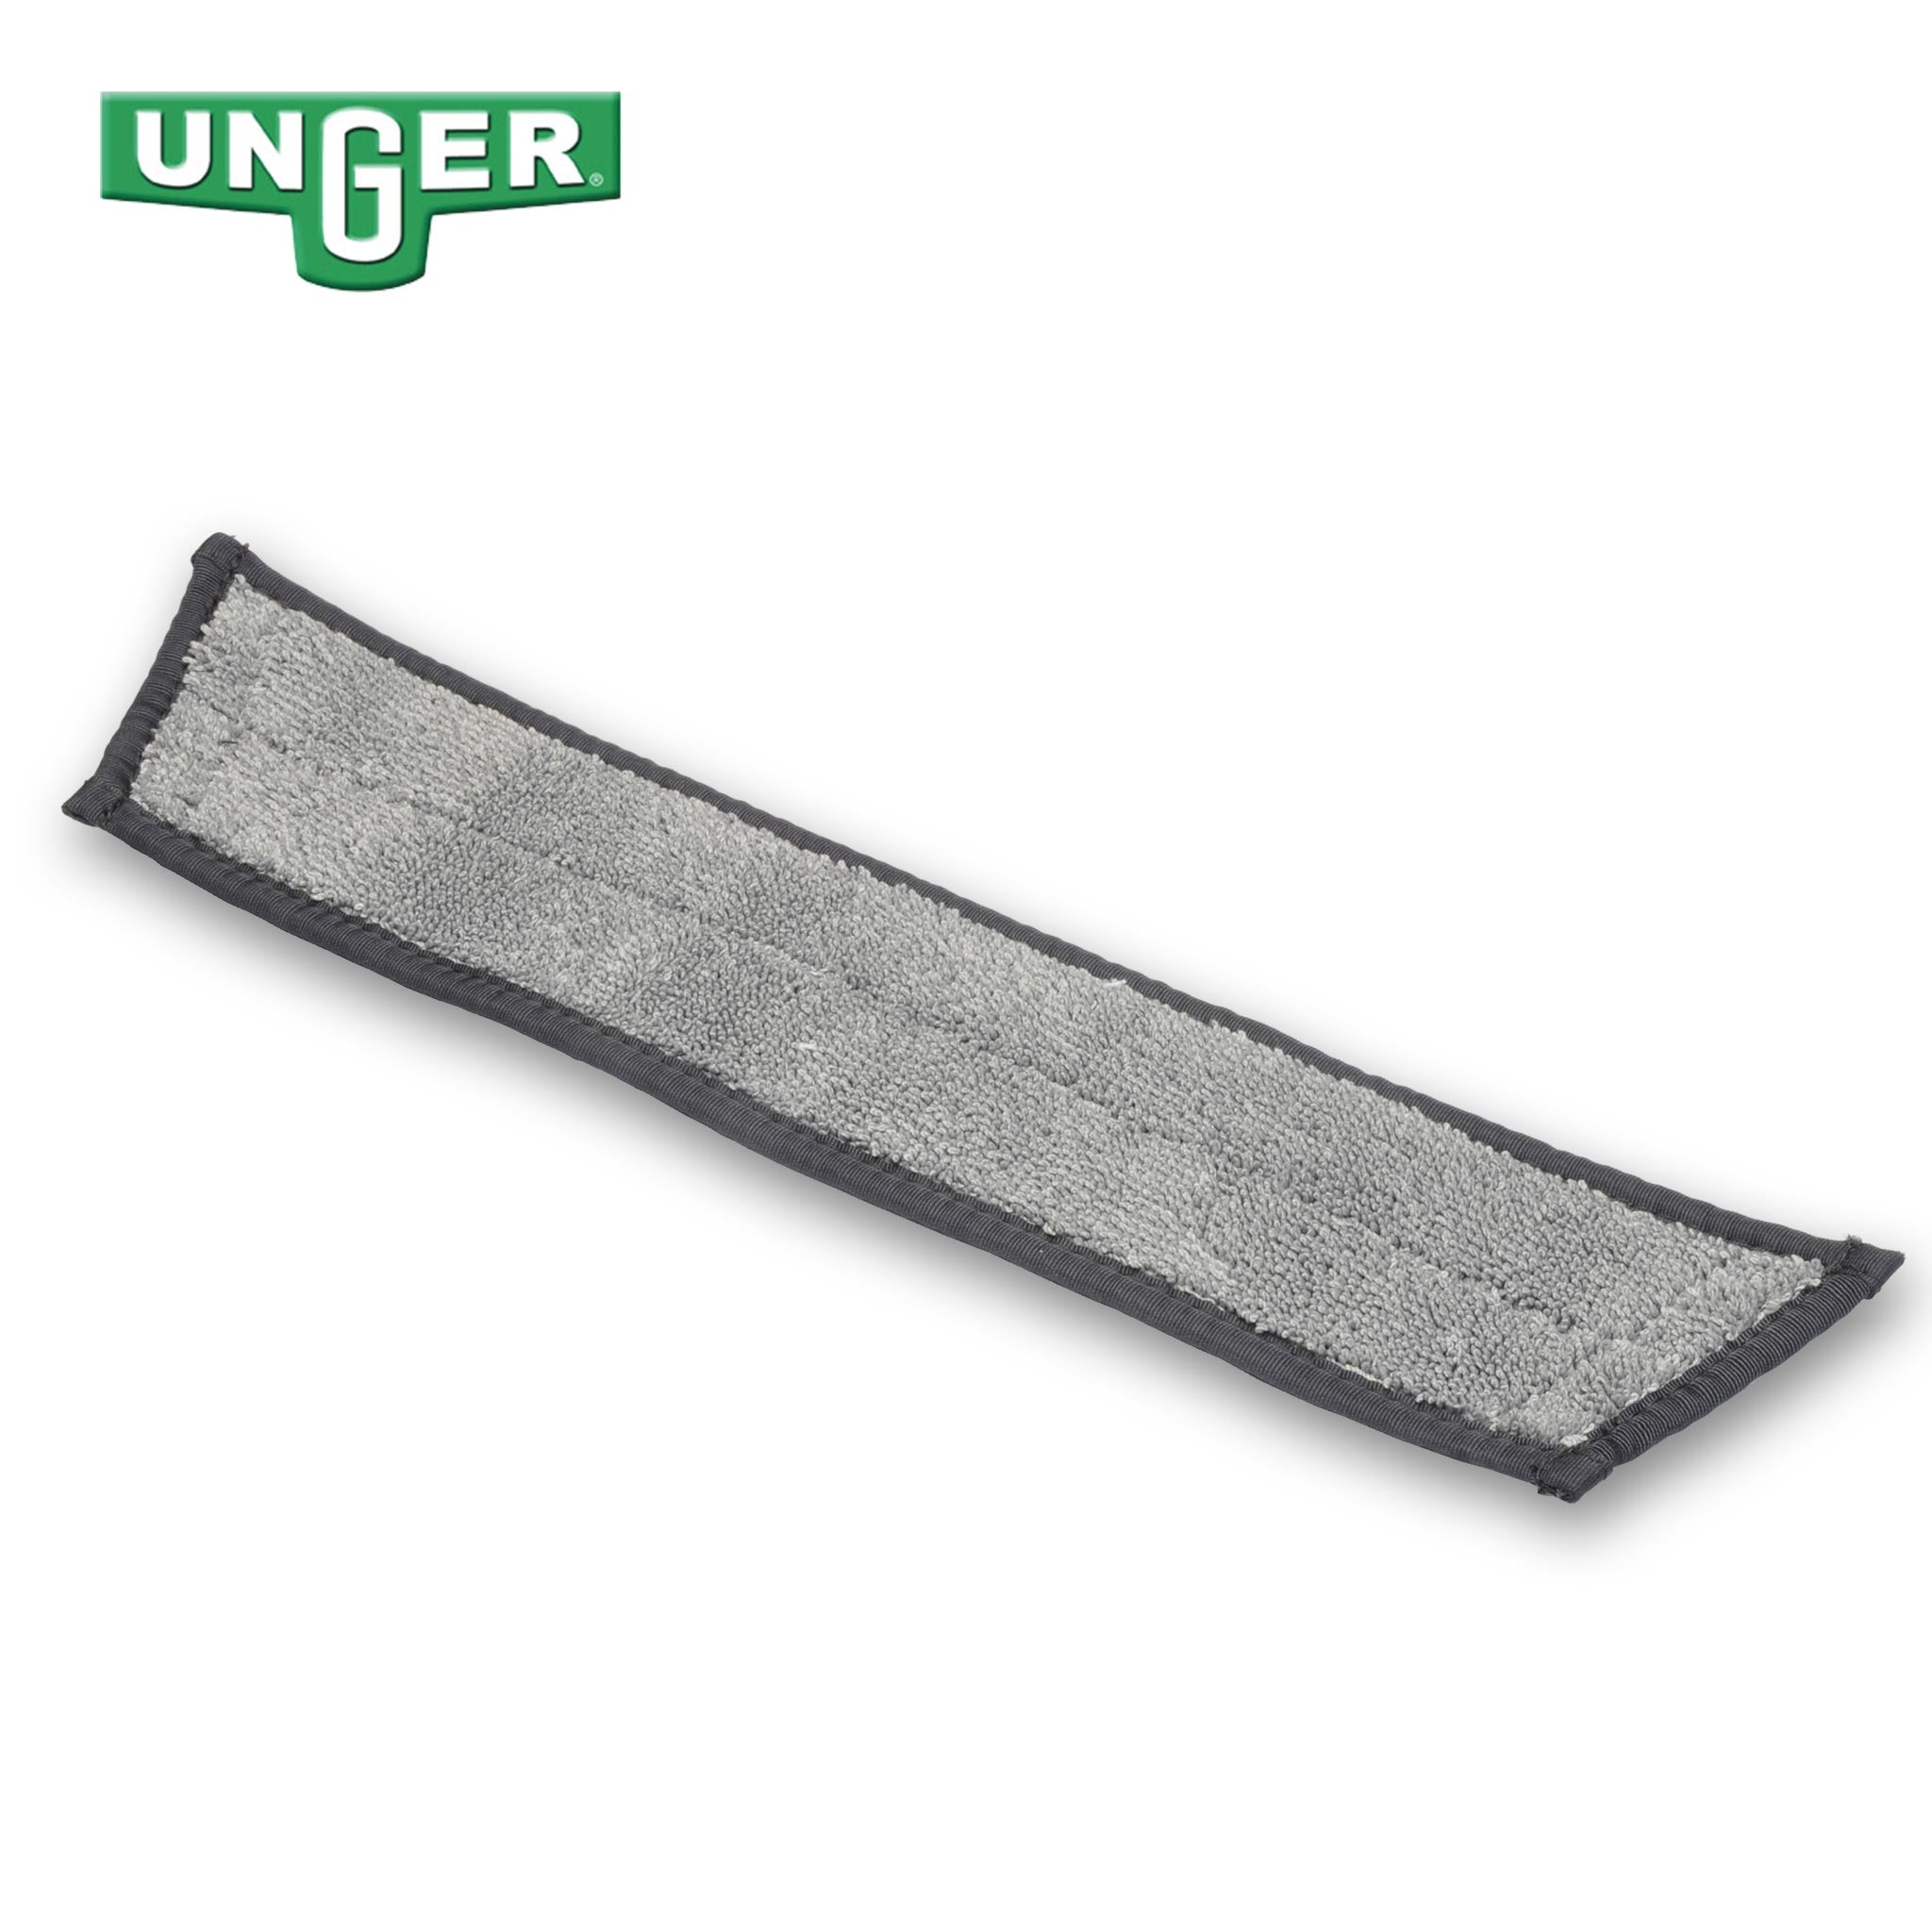 Unger nLite Microfibre Cleaning Pad